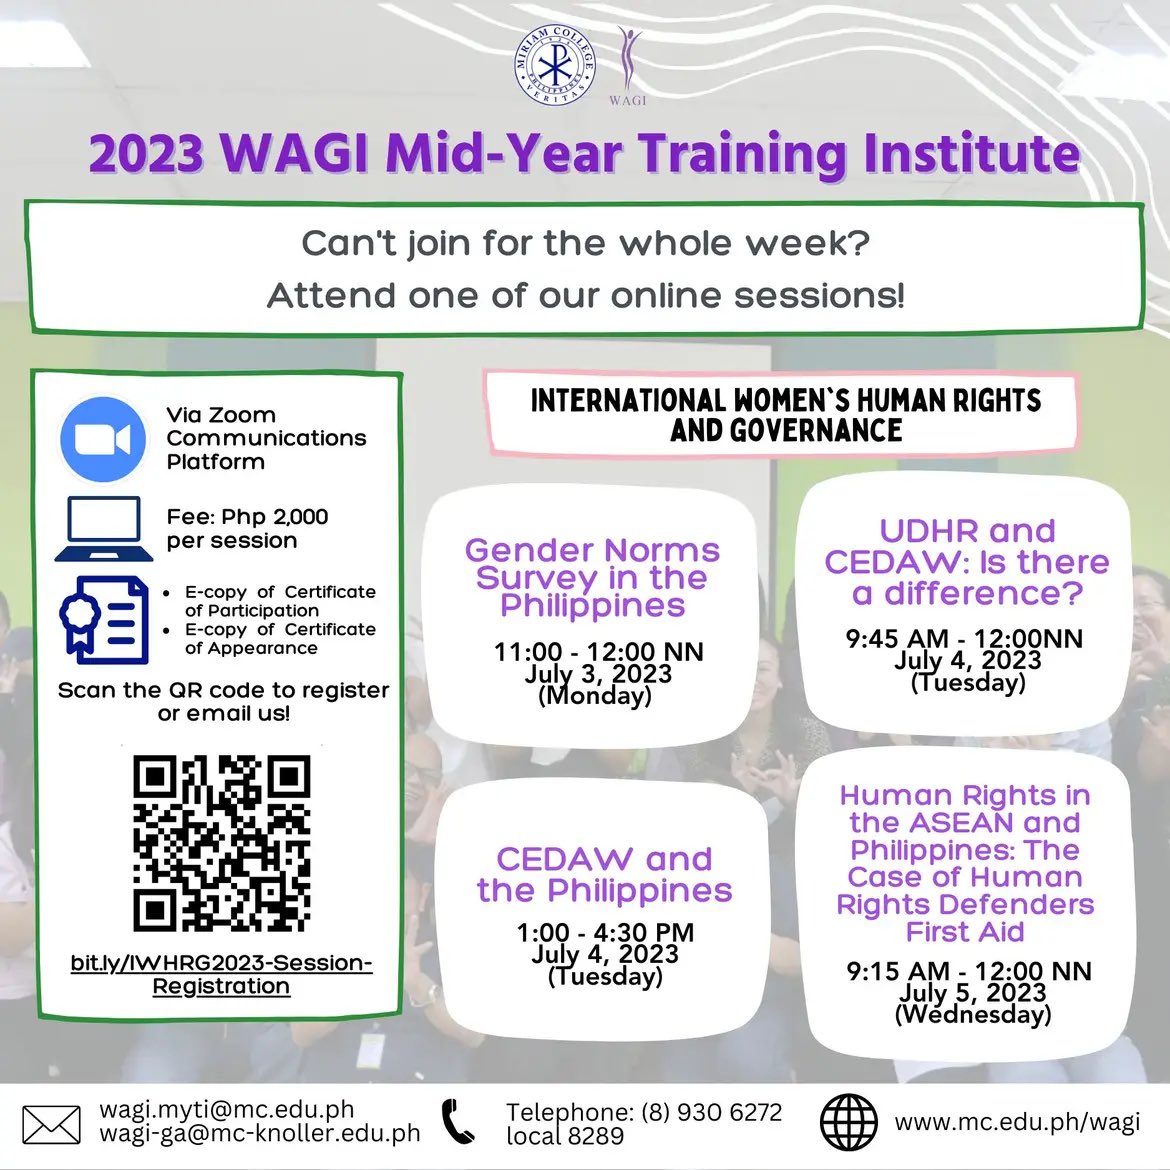 The International Women's Human Rights and Governance (IWHRG) organized by the Women and Gender Institute (WAGI) will commence this July 3-7, 2023! 

Here are some of the sessions you can join online: